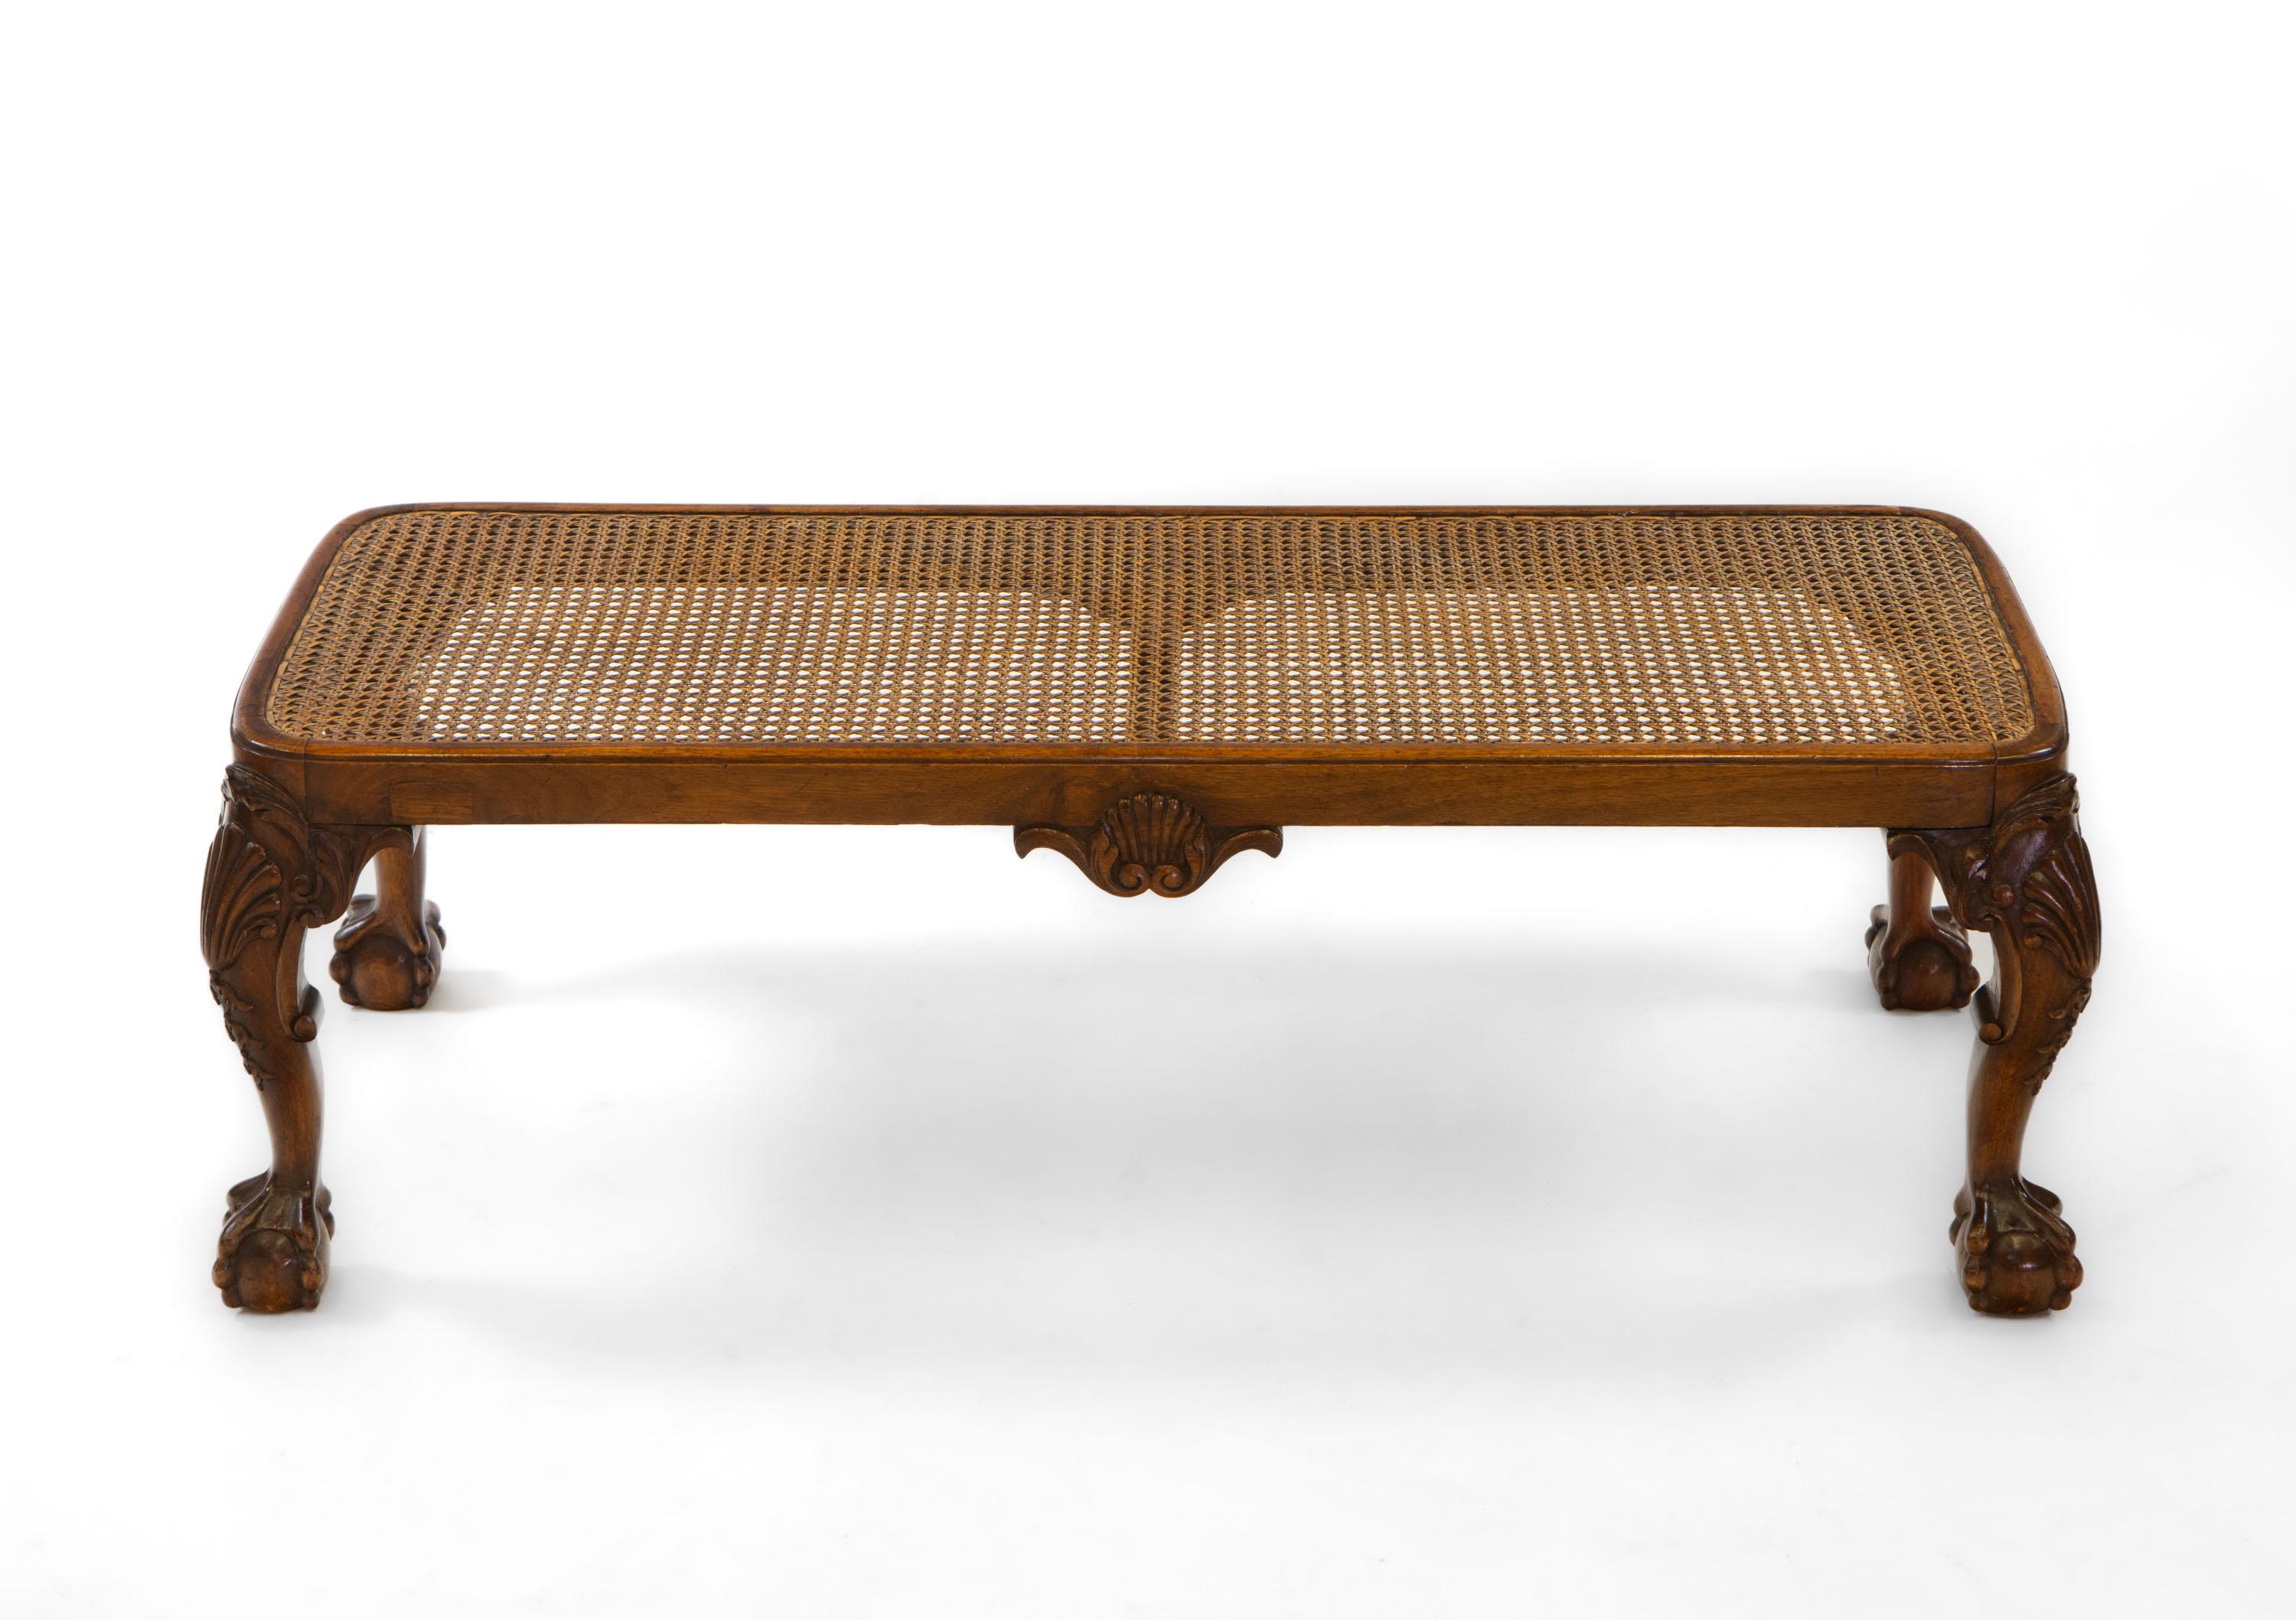 Antique walnut and cane window seat of good quality. Circa 1900-1920.

Delivery is INCLUDED in the price for all areas in MAINLAND England & Wales. 

A versatile seat that could also be used at the end of a bed. The seat is of good proportions,